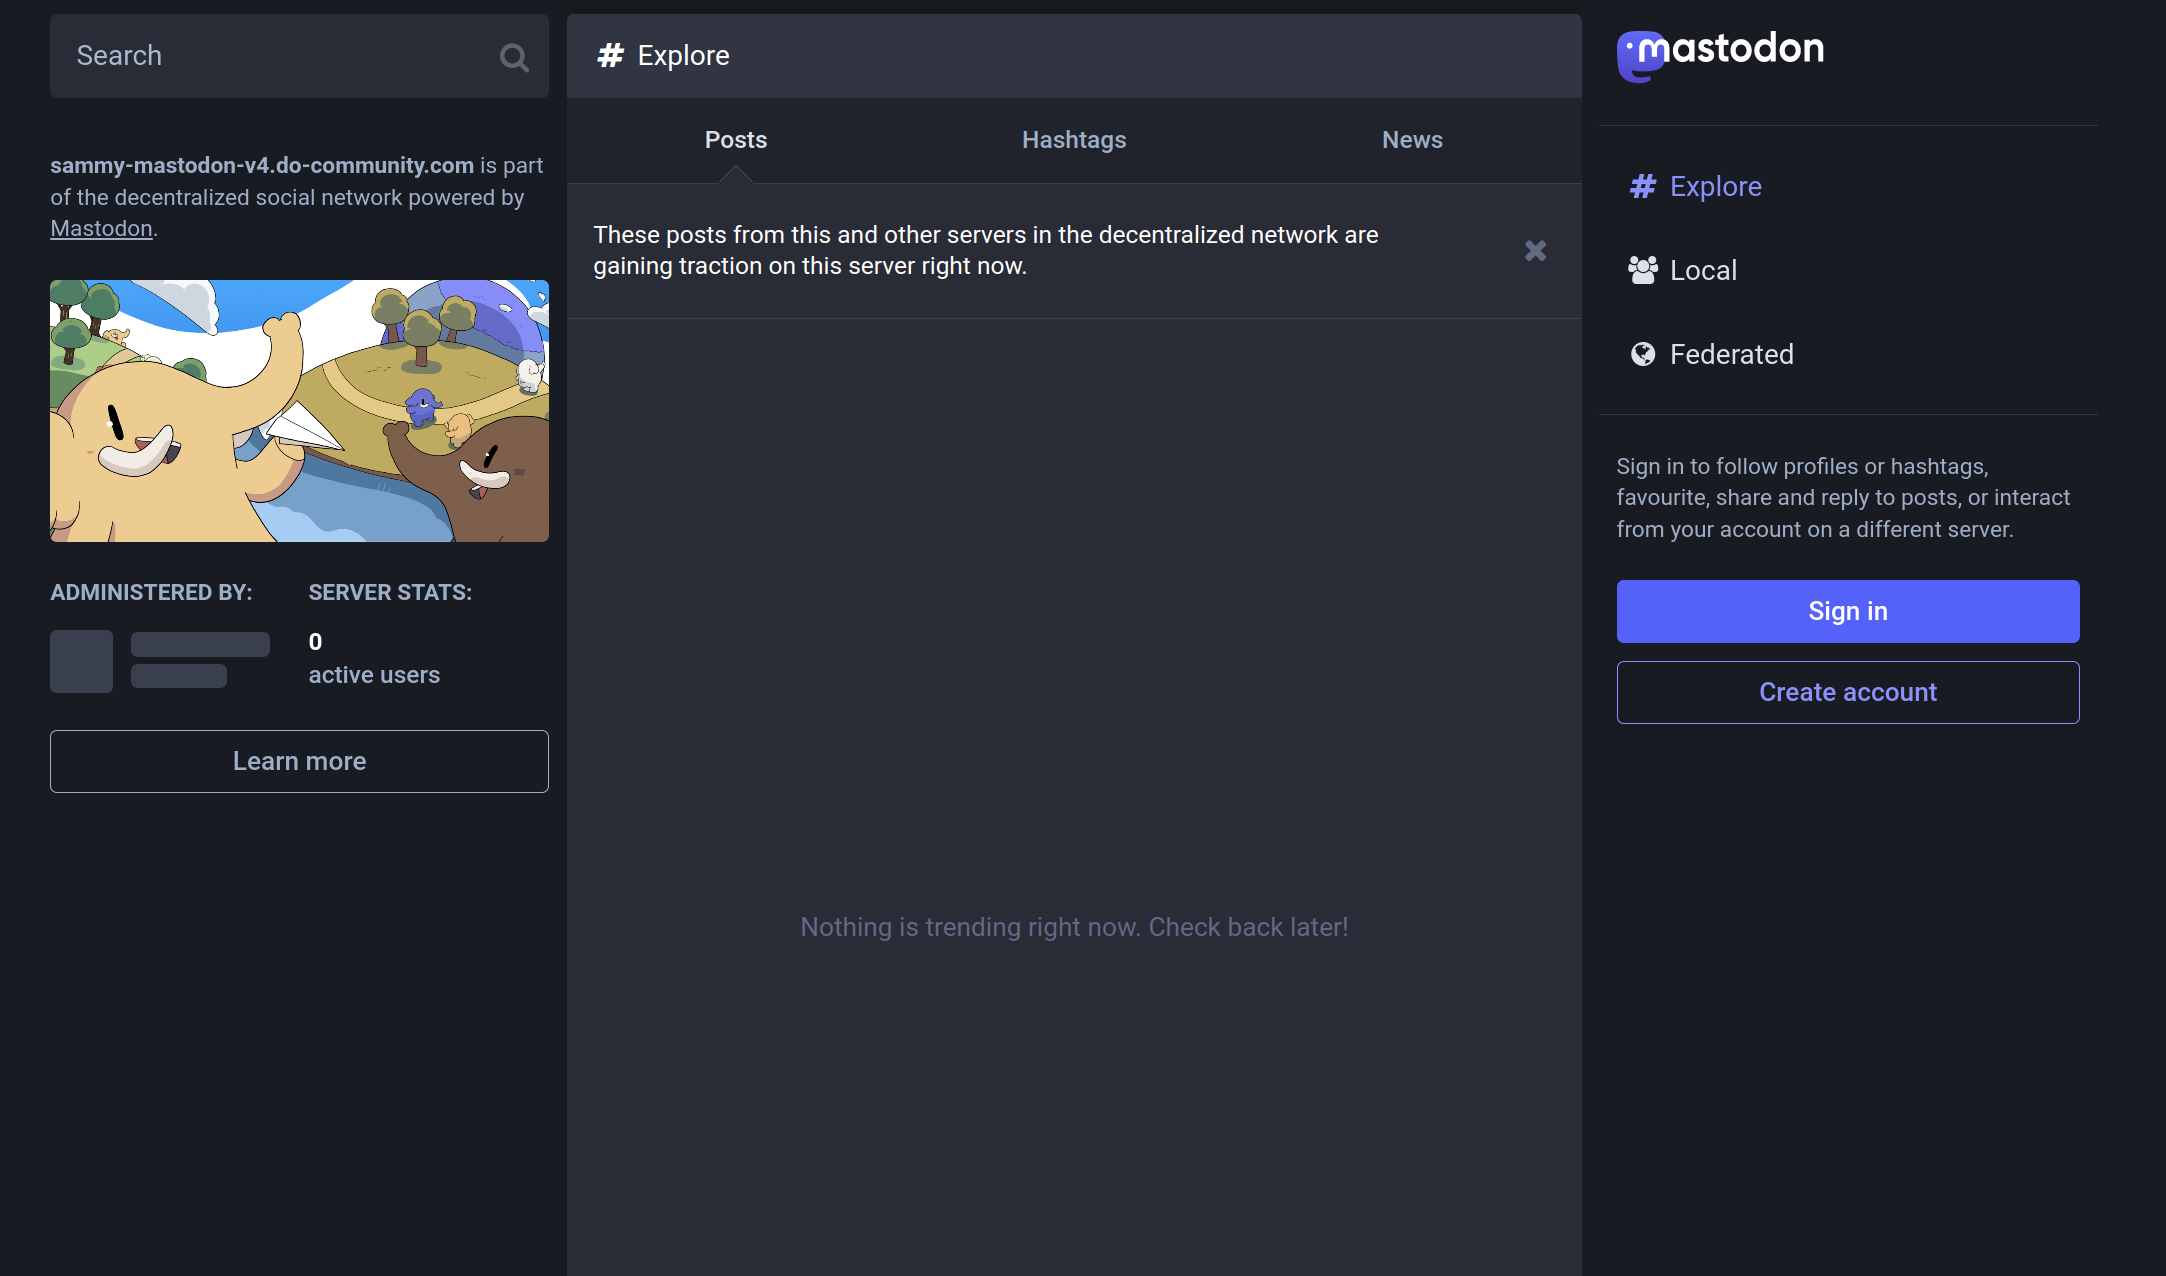 Landing page for your new Mastodon server.